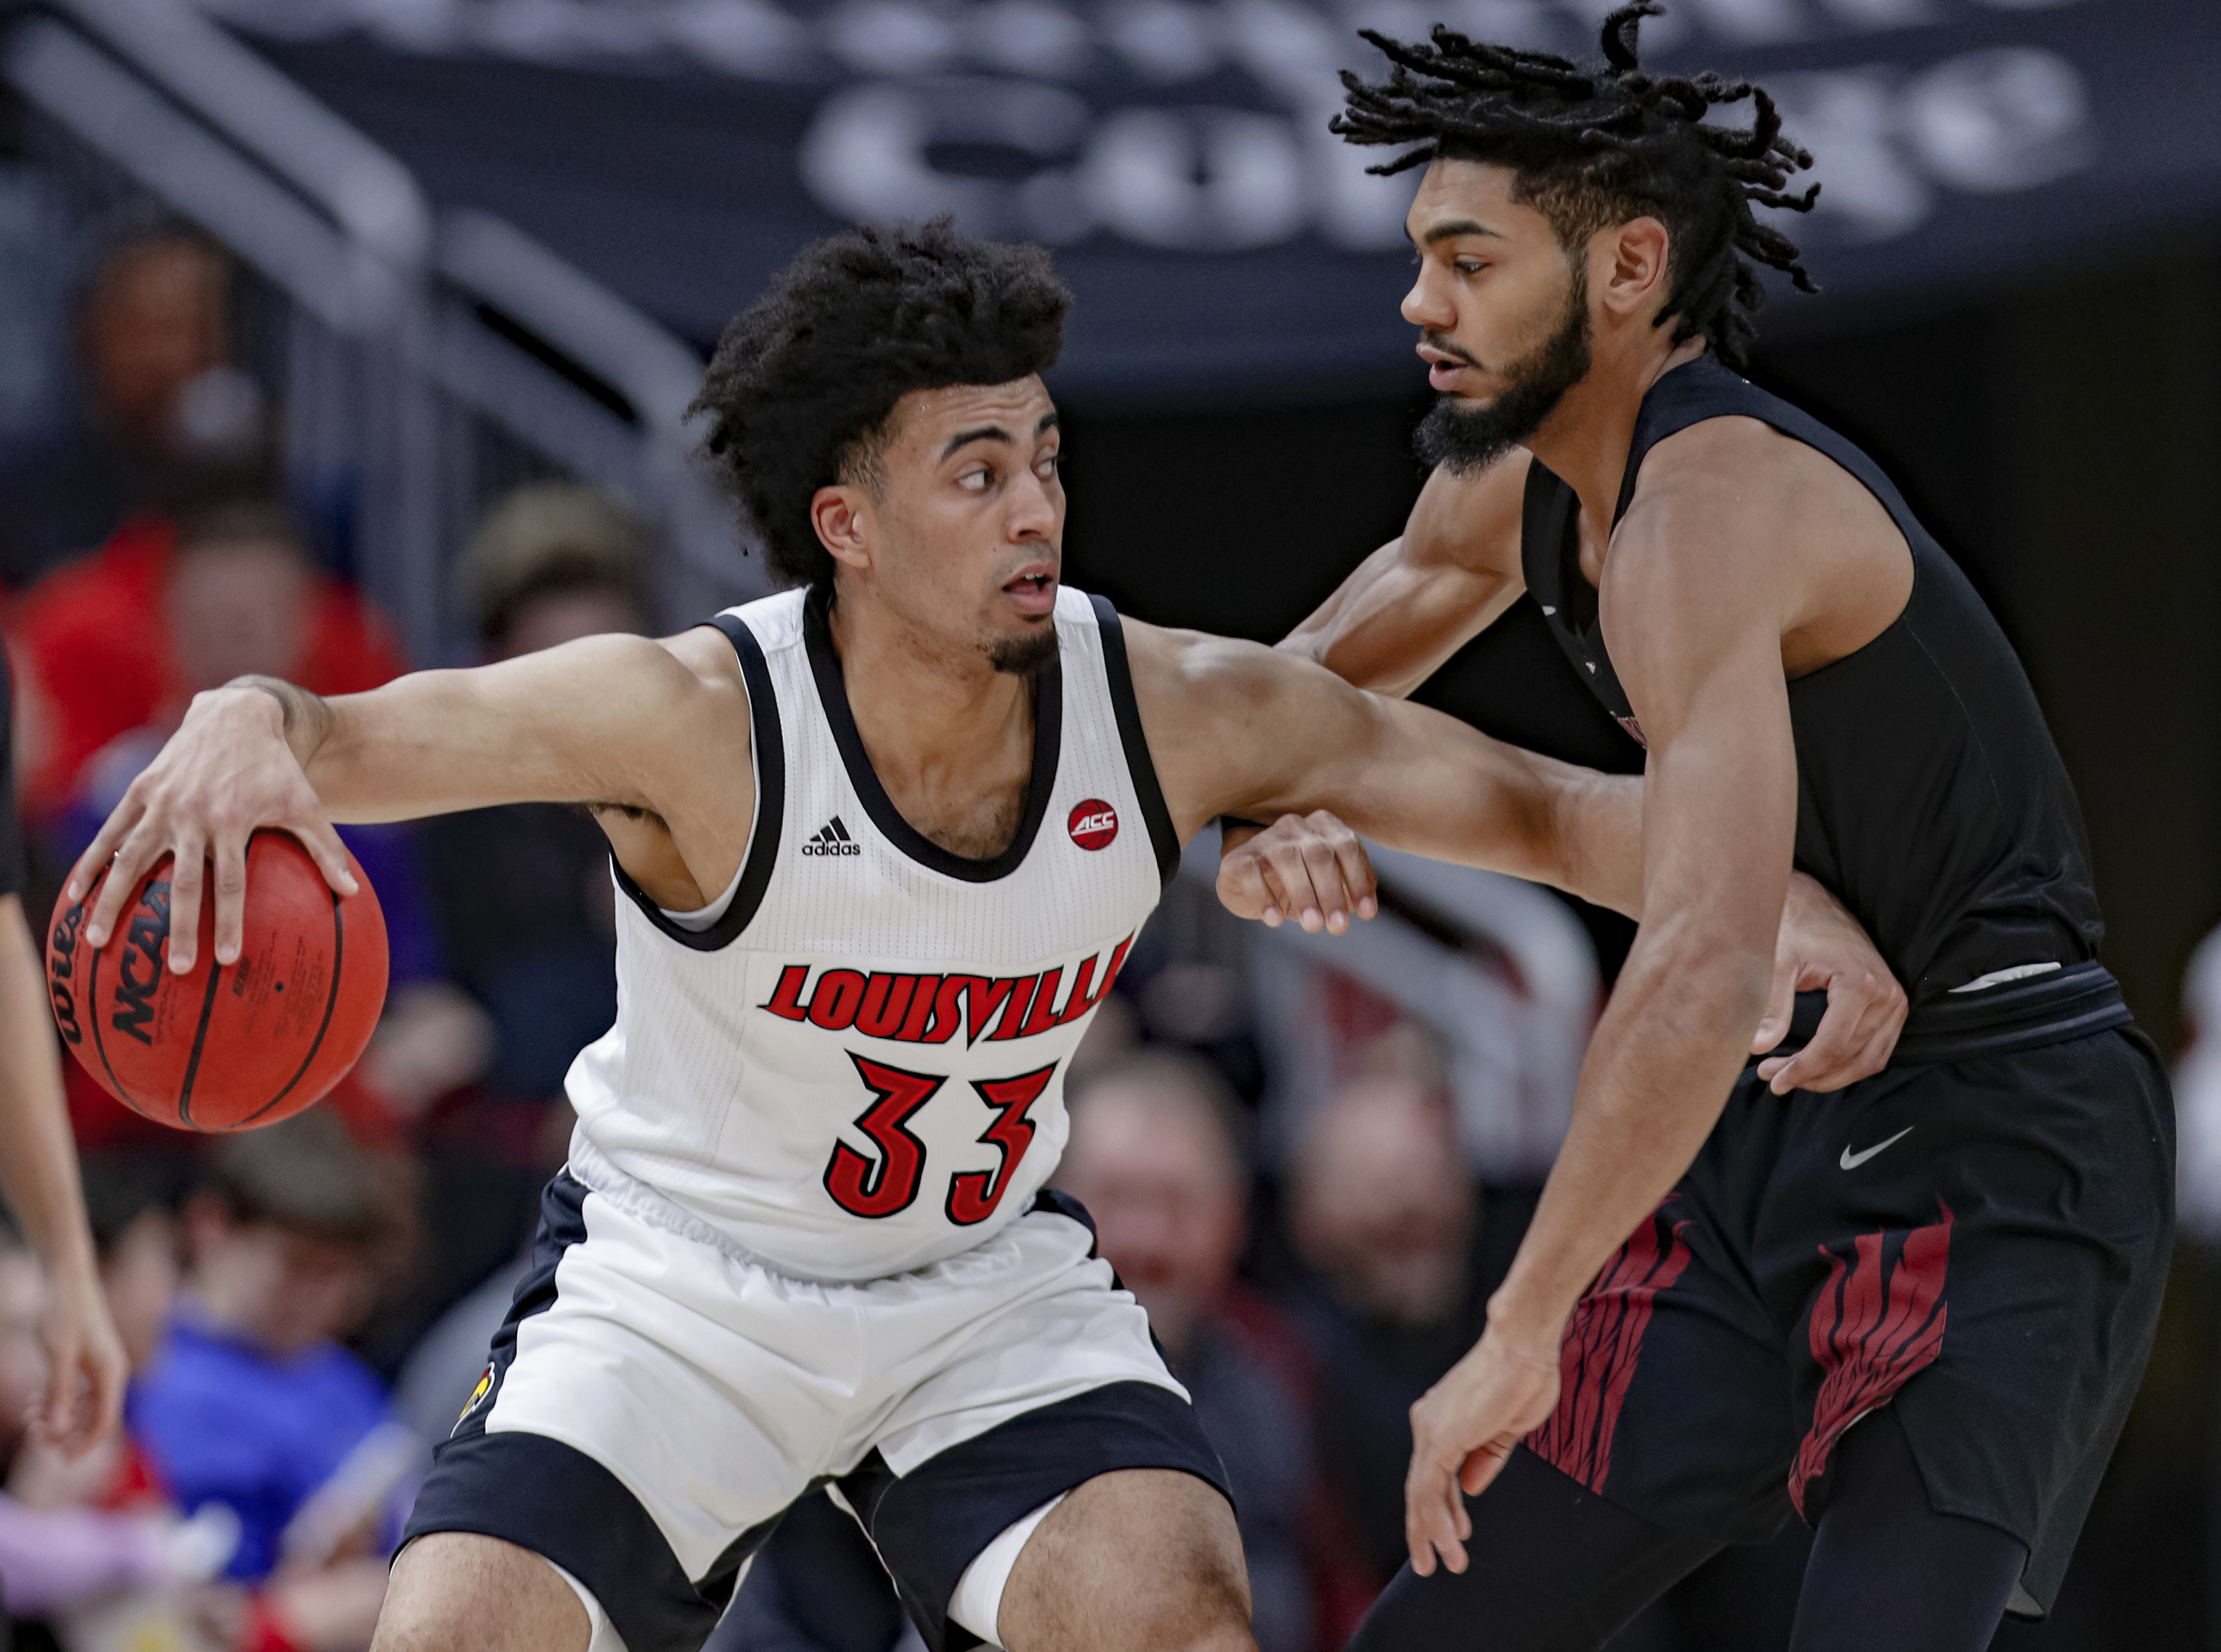 Possible starting lineups for Louisville basketball 2018-19